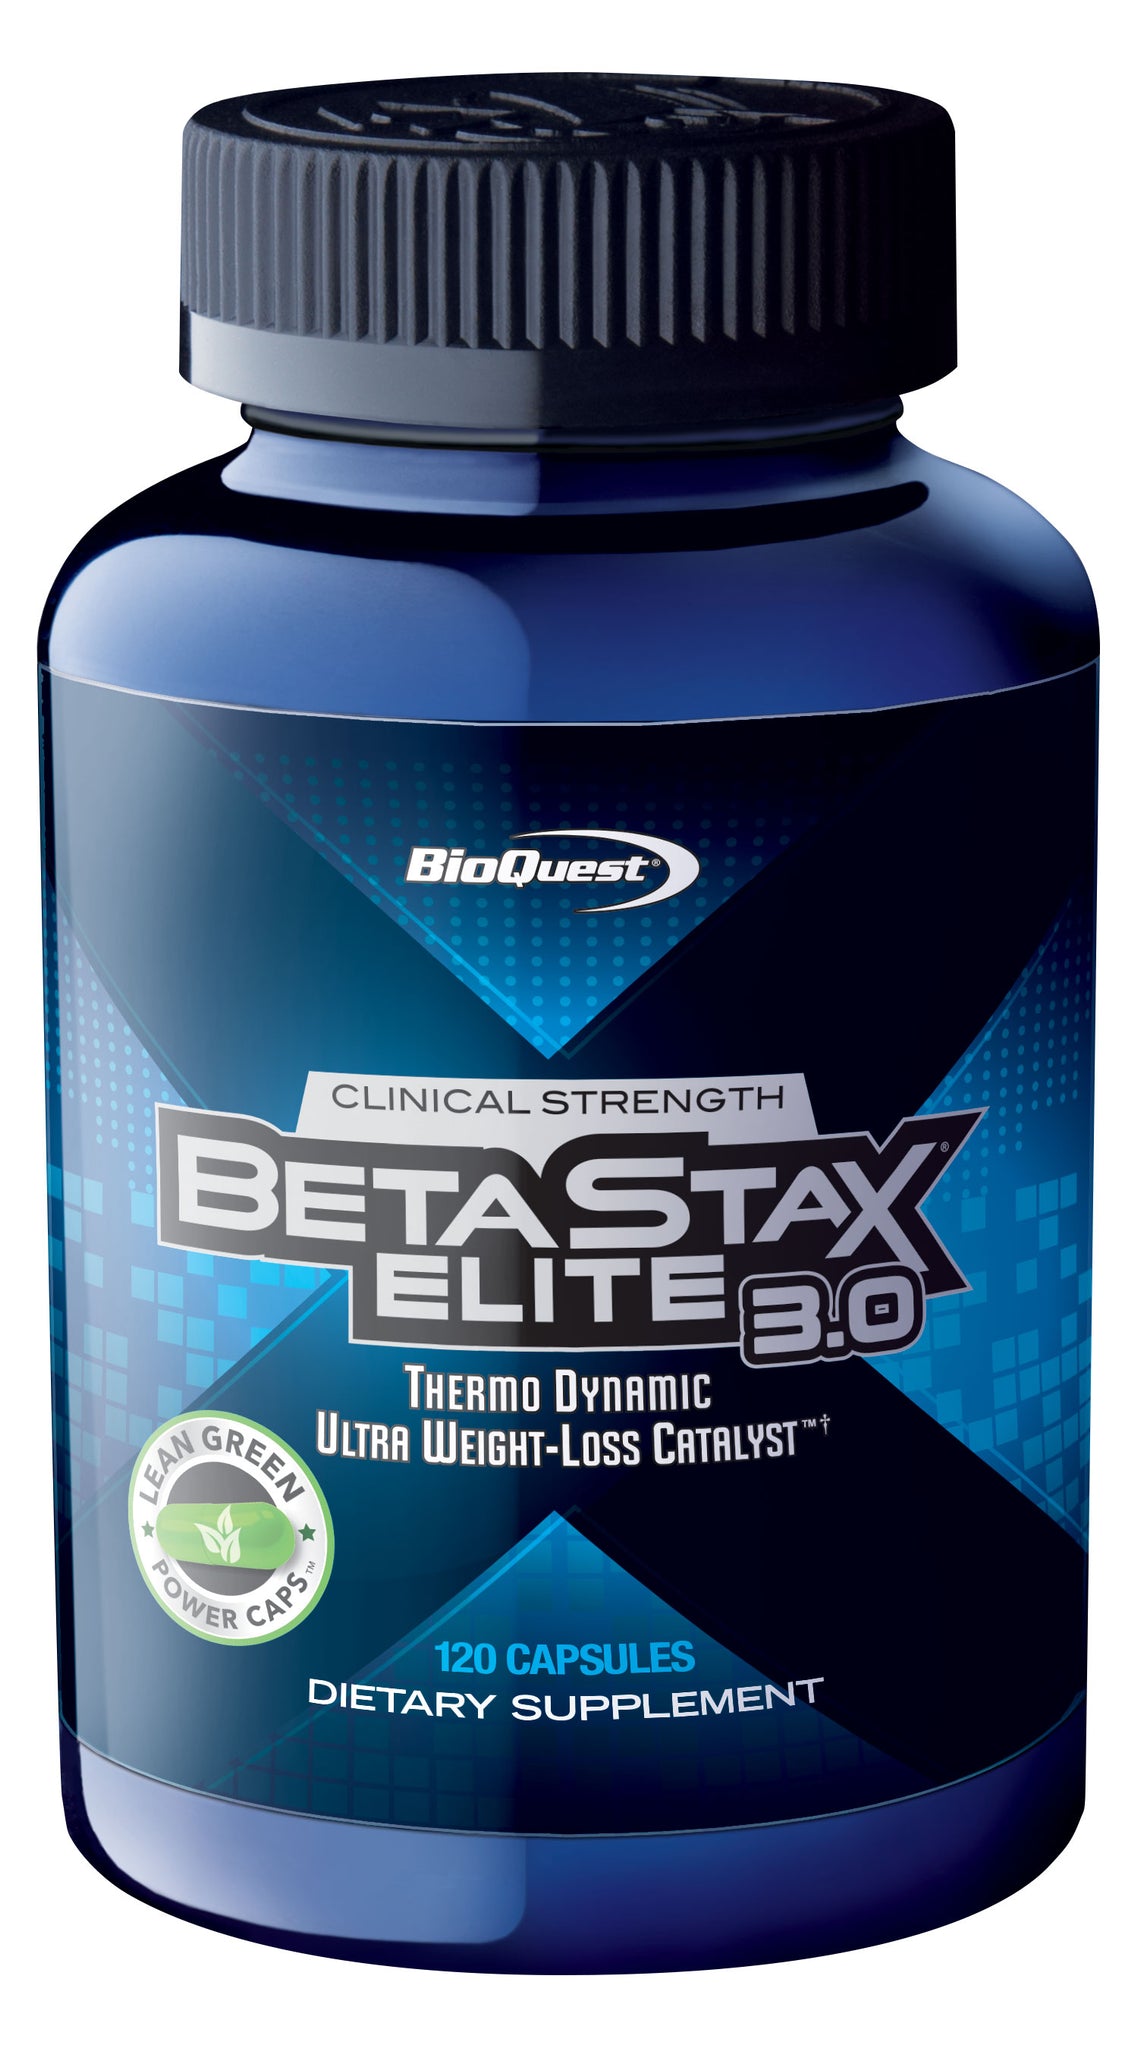 bioquest betastax elite 3.0 thermo dynamic ultra weight loss catalyst 120 lean green power caps